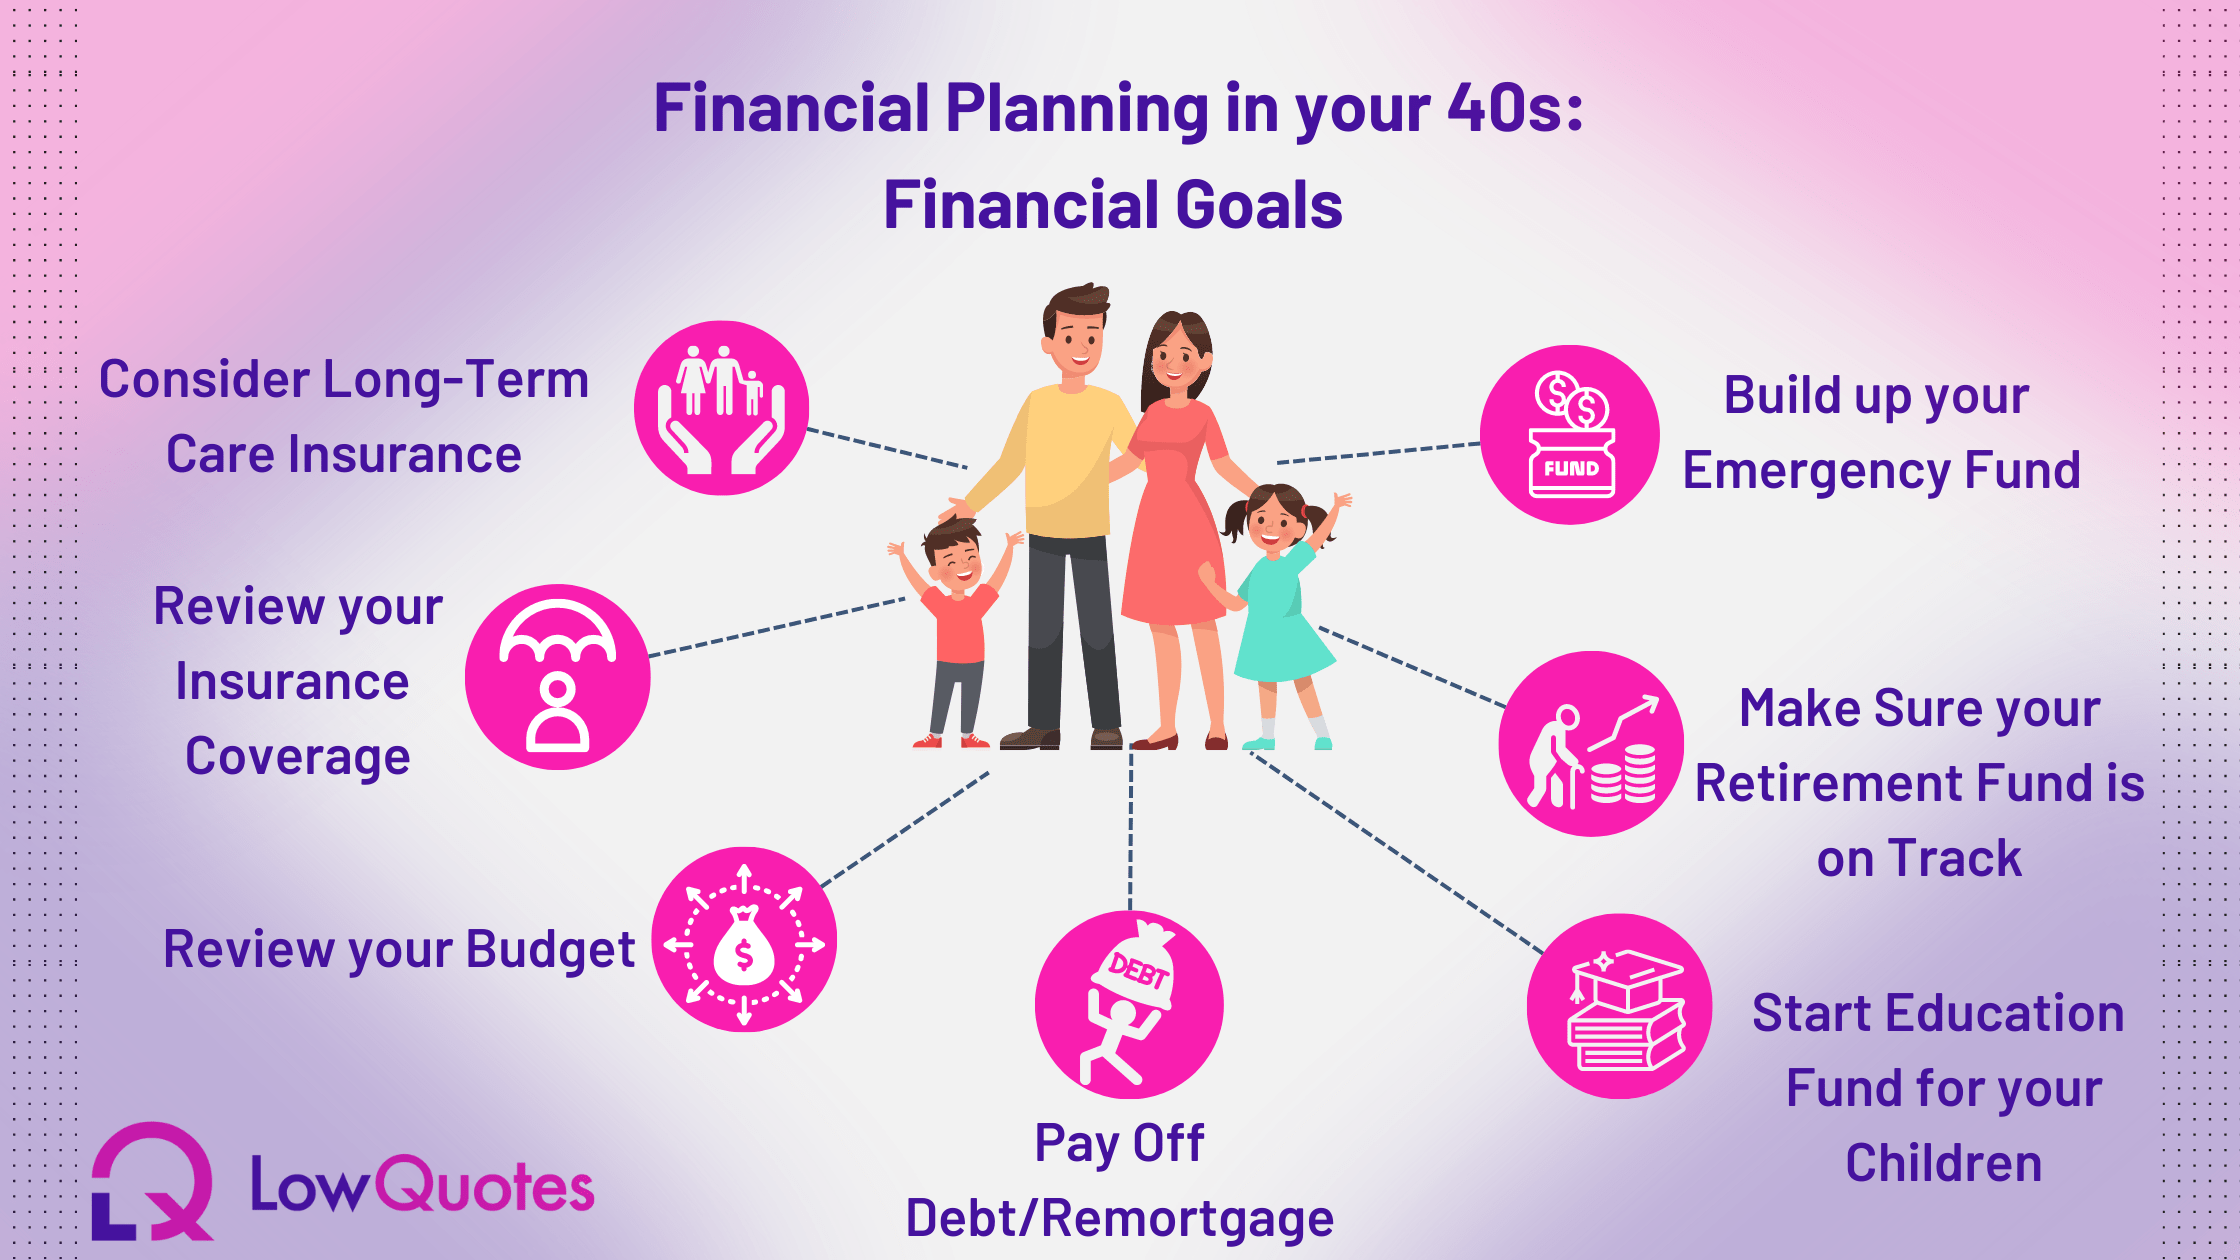 Financial Planning in your 40s - LowQuotes